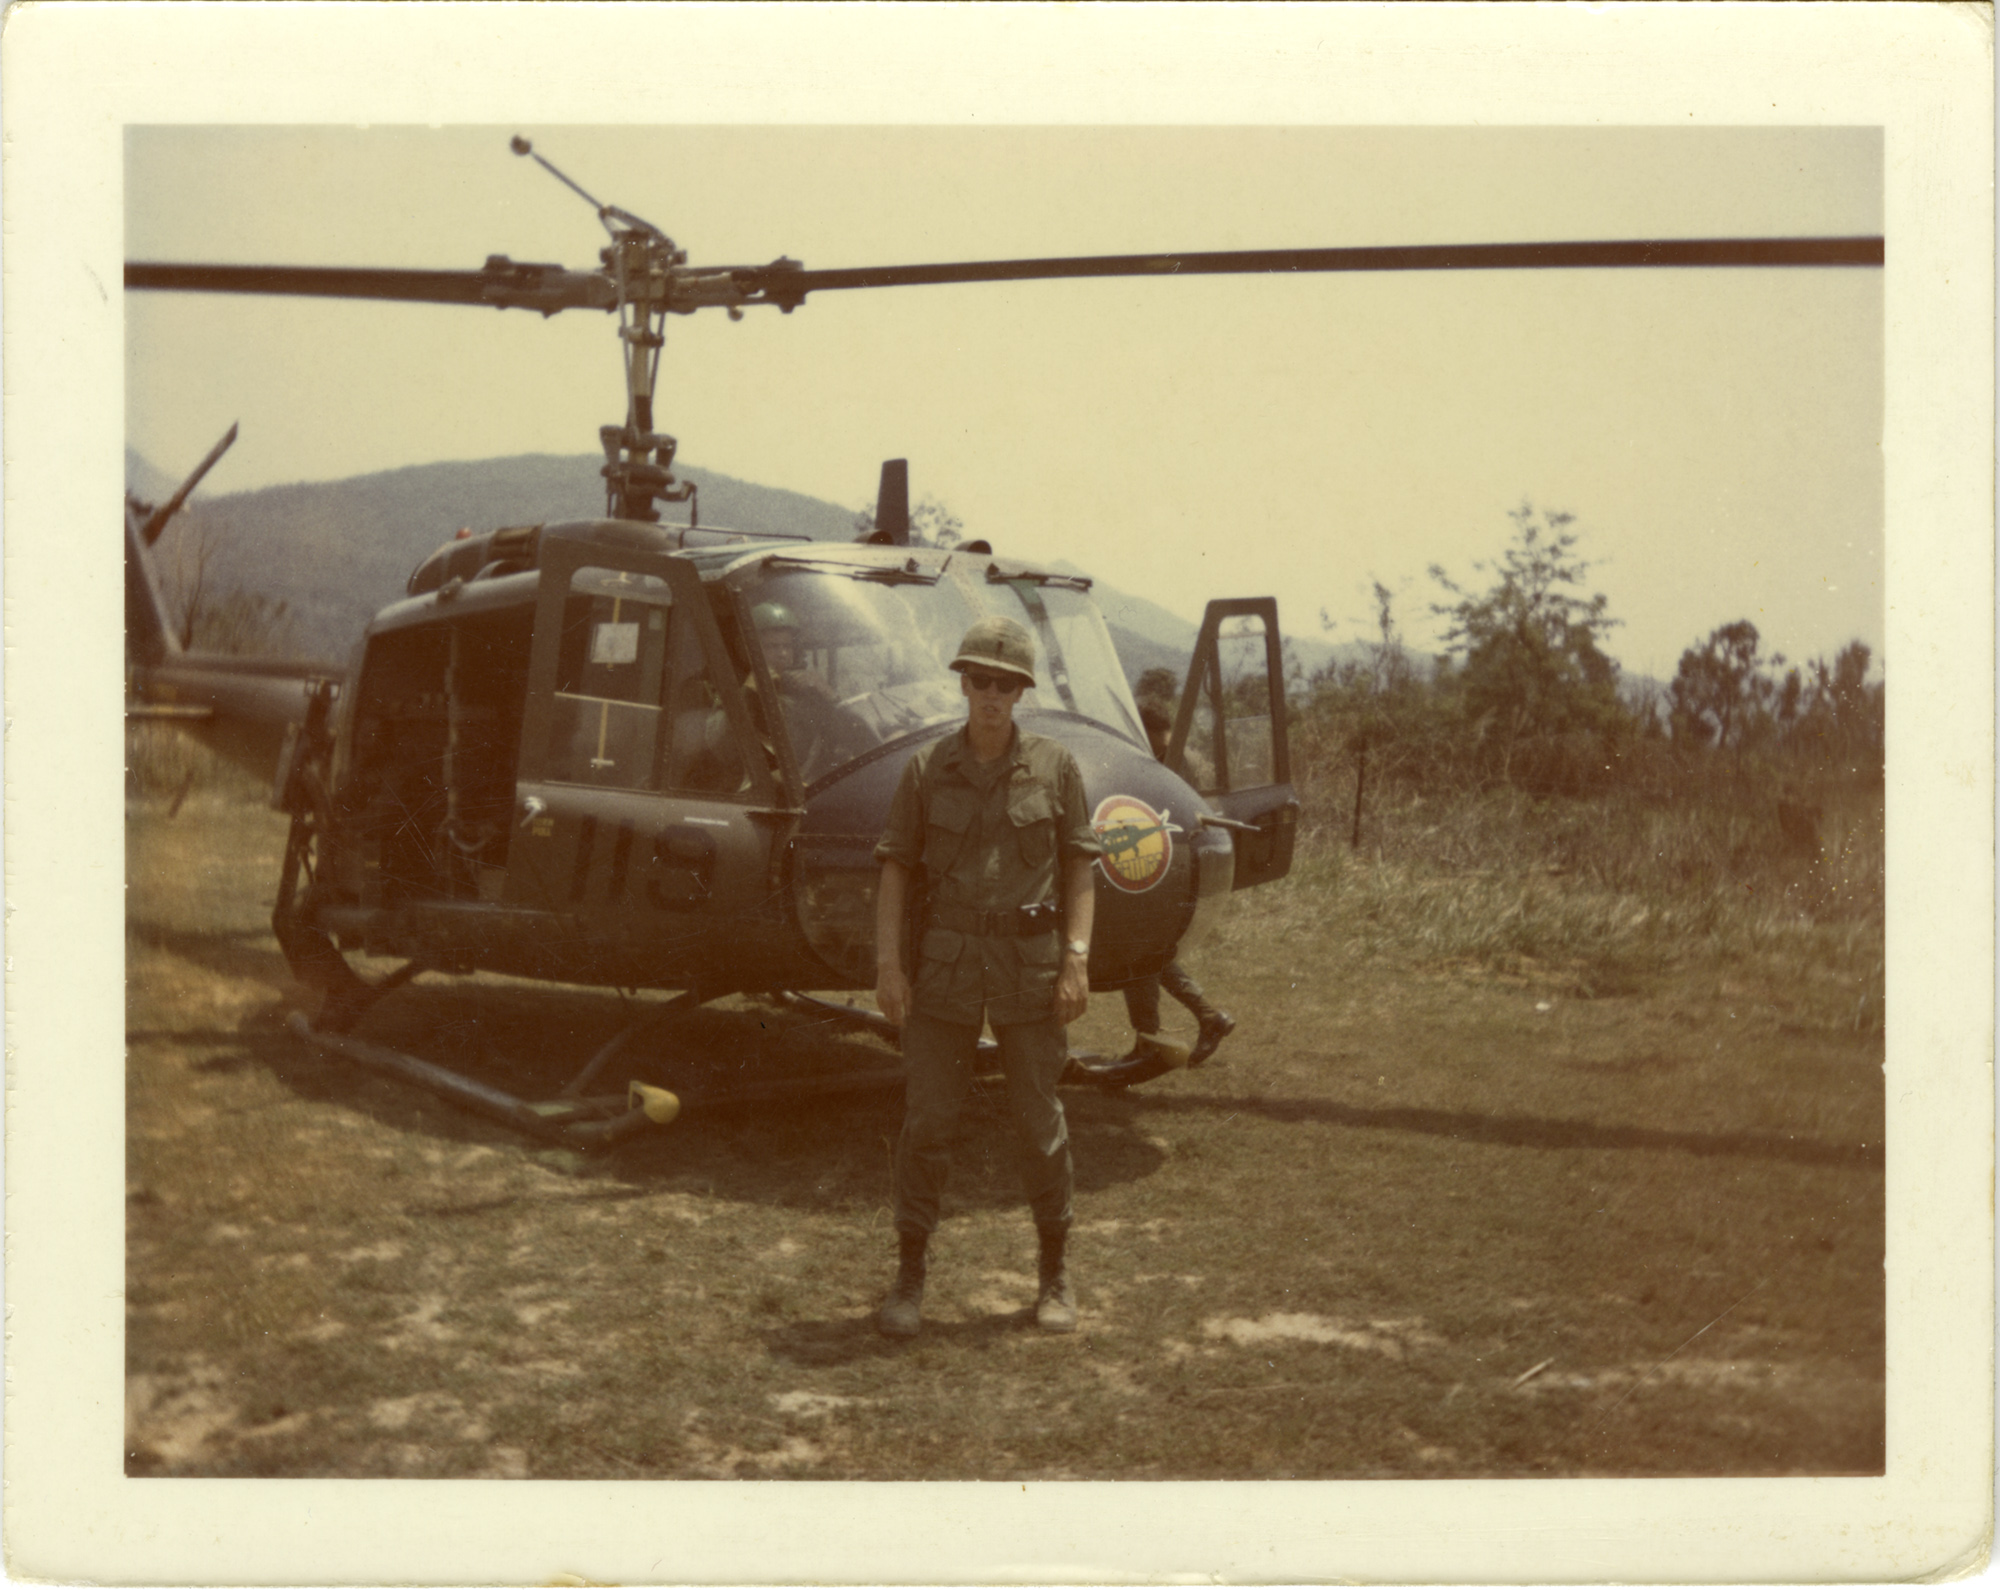 A soldier stands in front of a helicopter